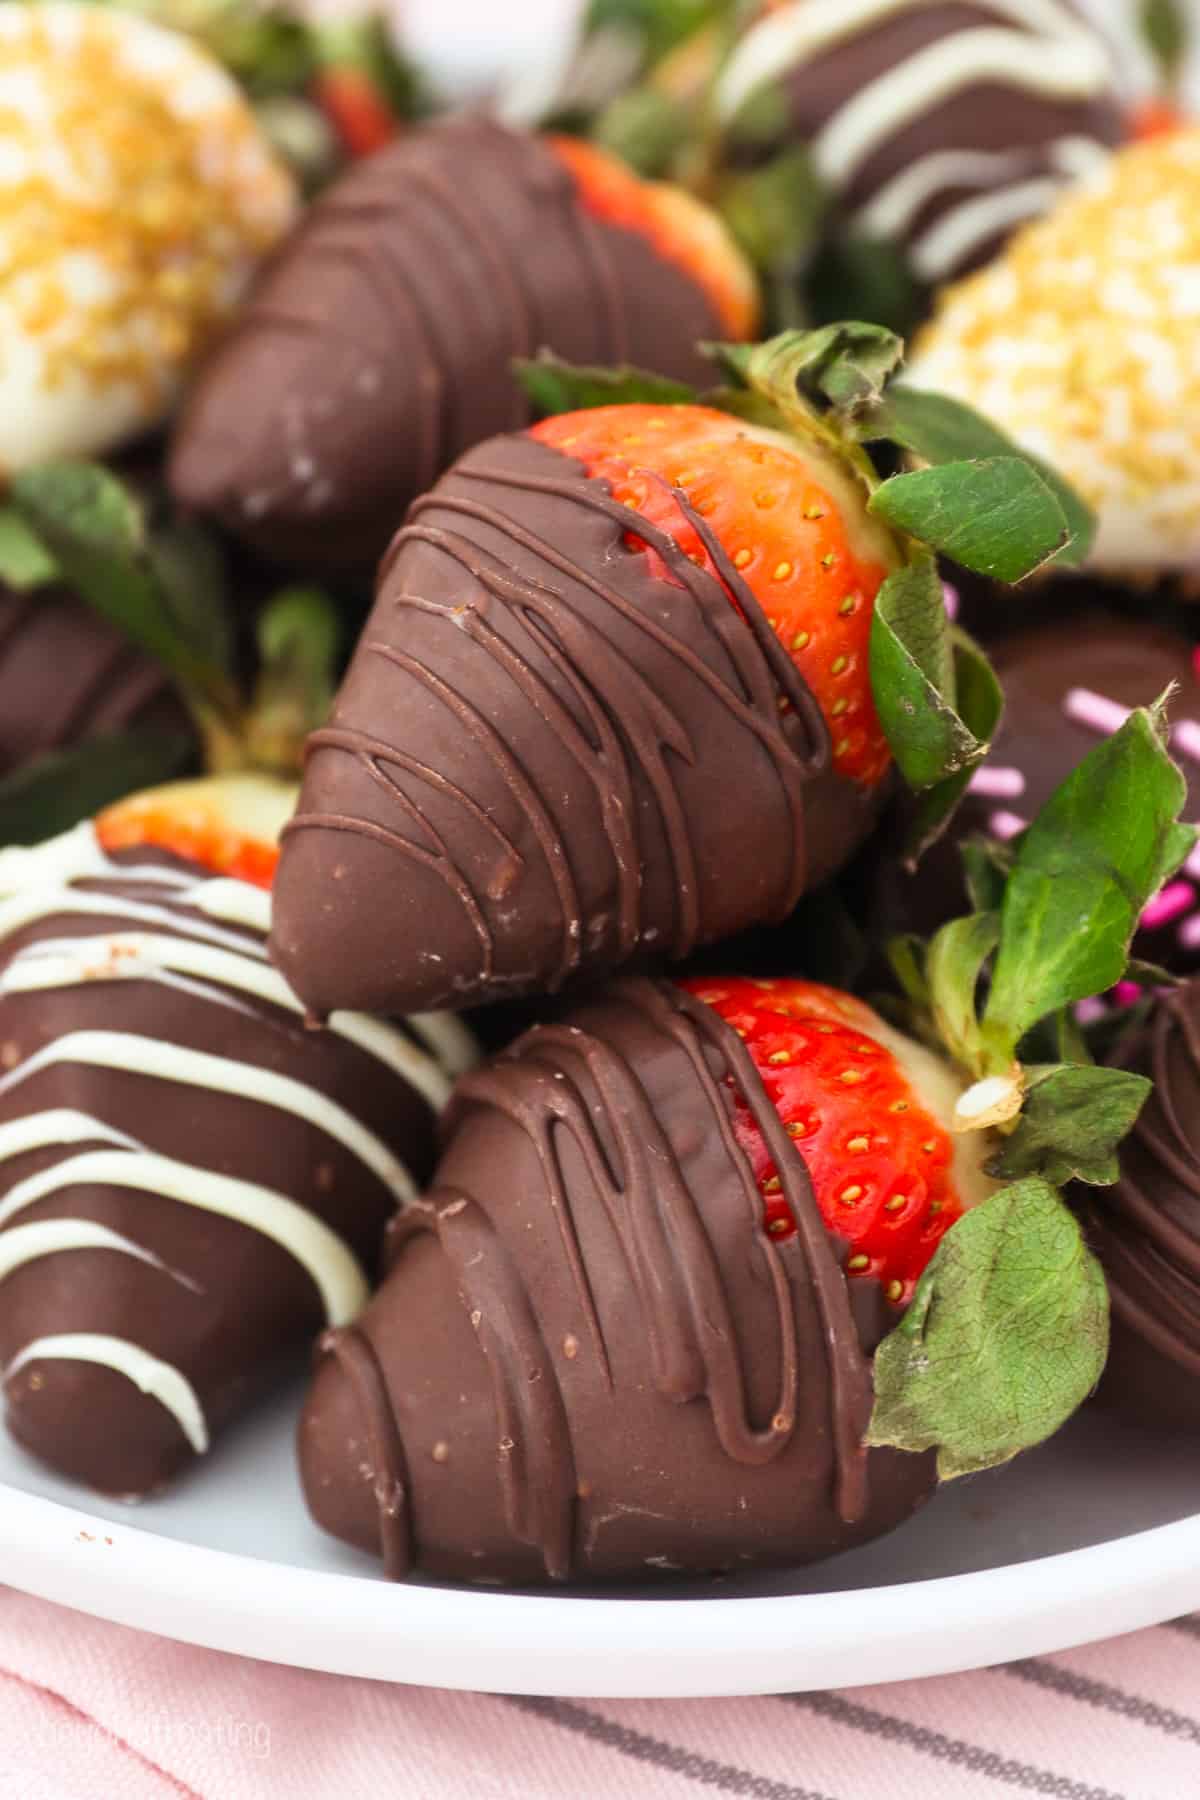 Assorted chocolate covered strawberries arranged on a white plate.